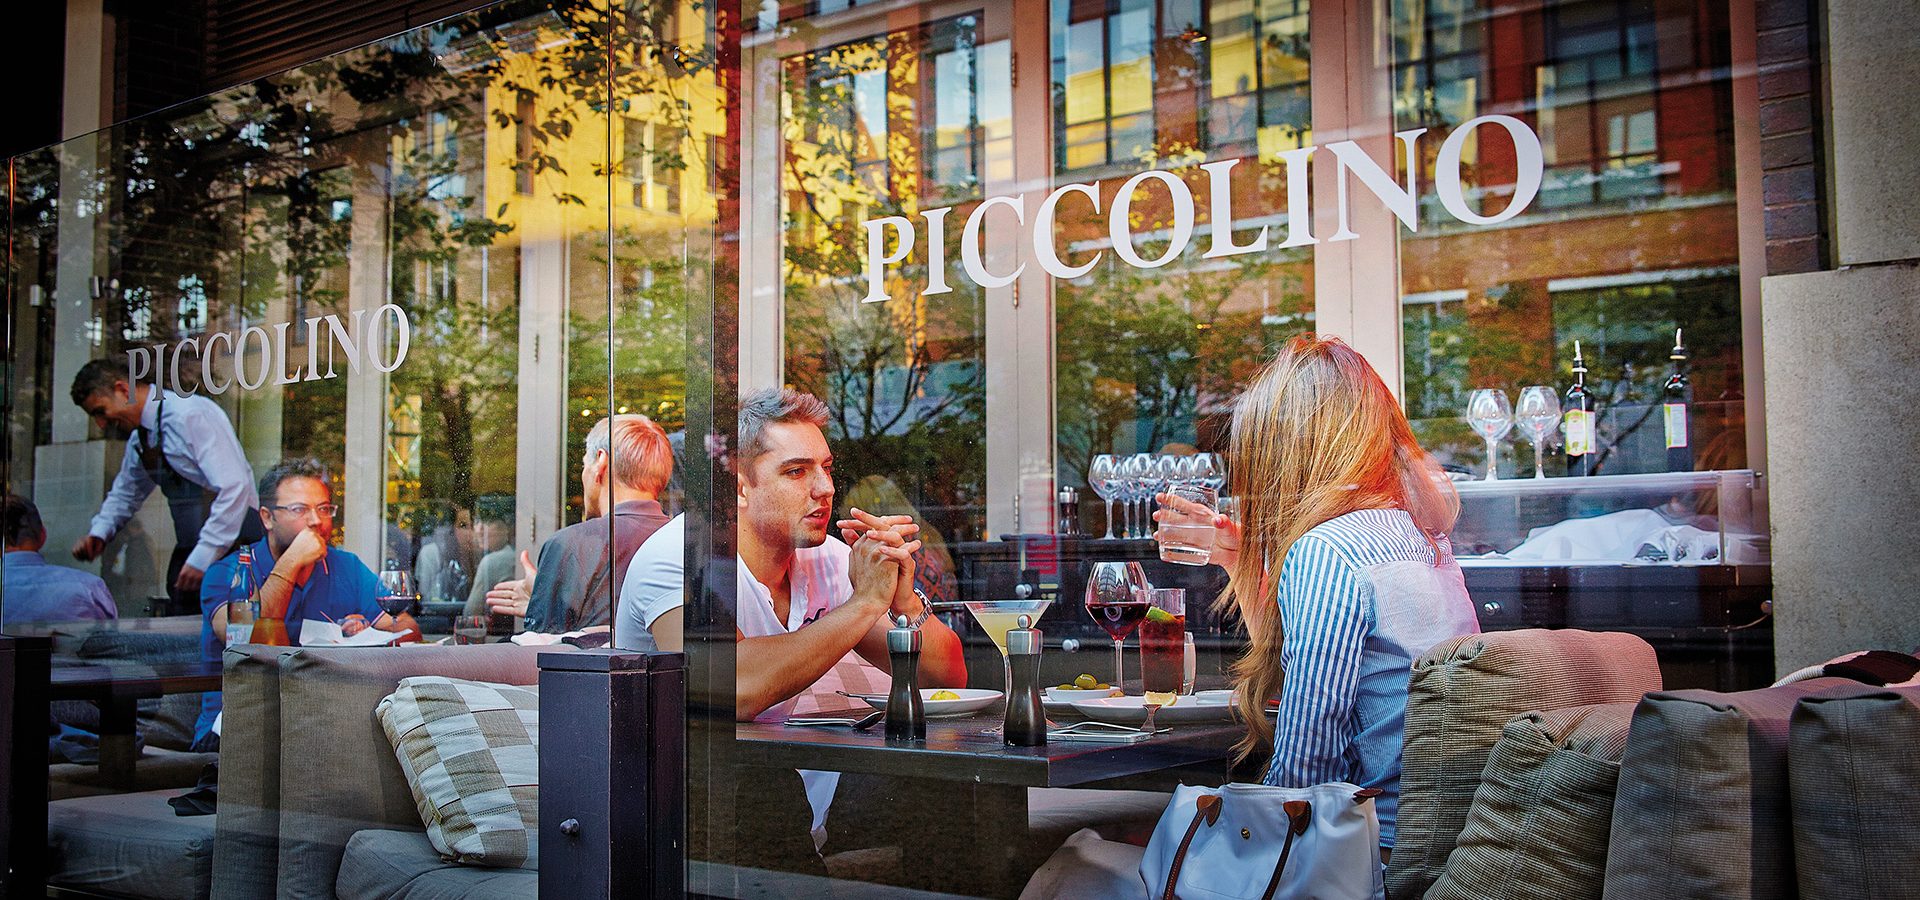 Two people eating and drinking through the window of Piccolino in Birmingham.